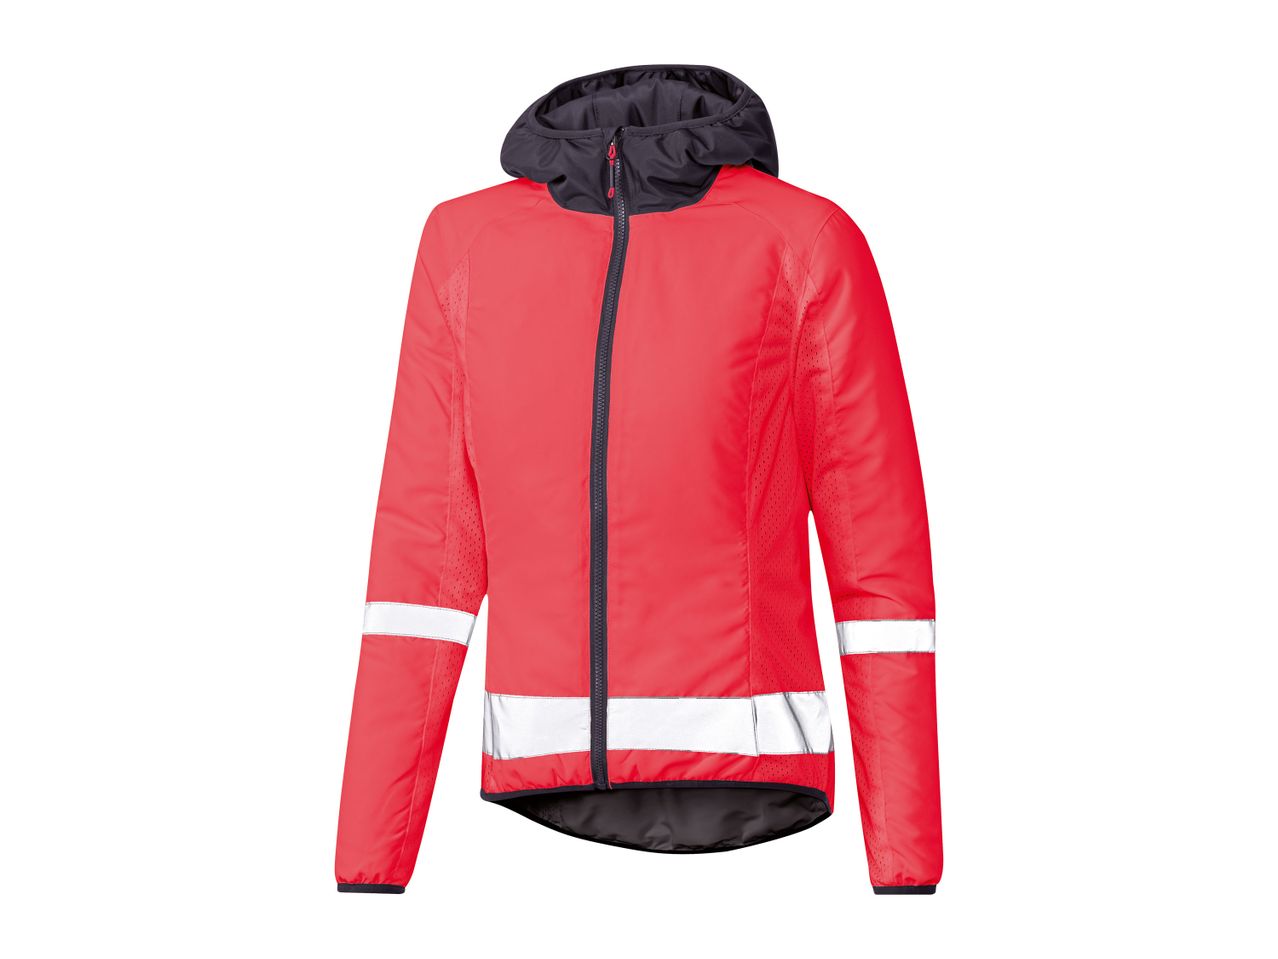 Go to full screen view: Crivit Ladies’ Reversible Cycling Jacket - Image 1